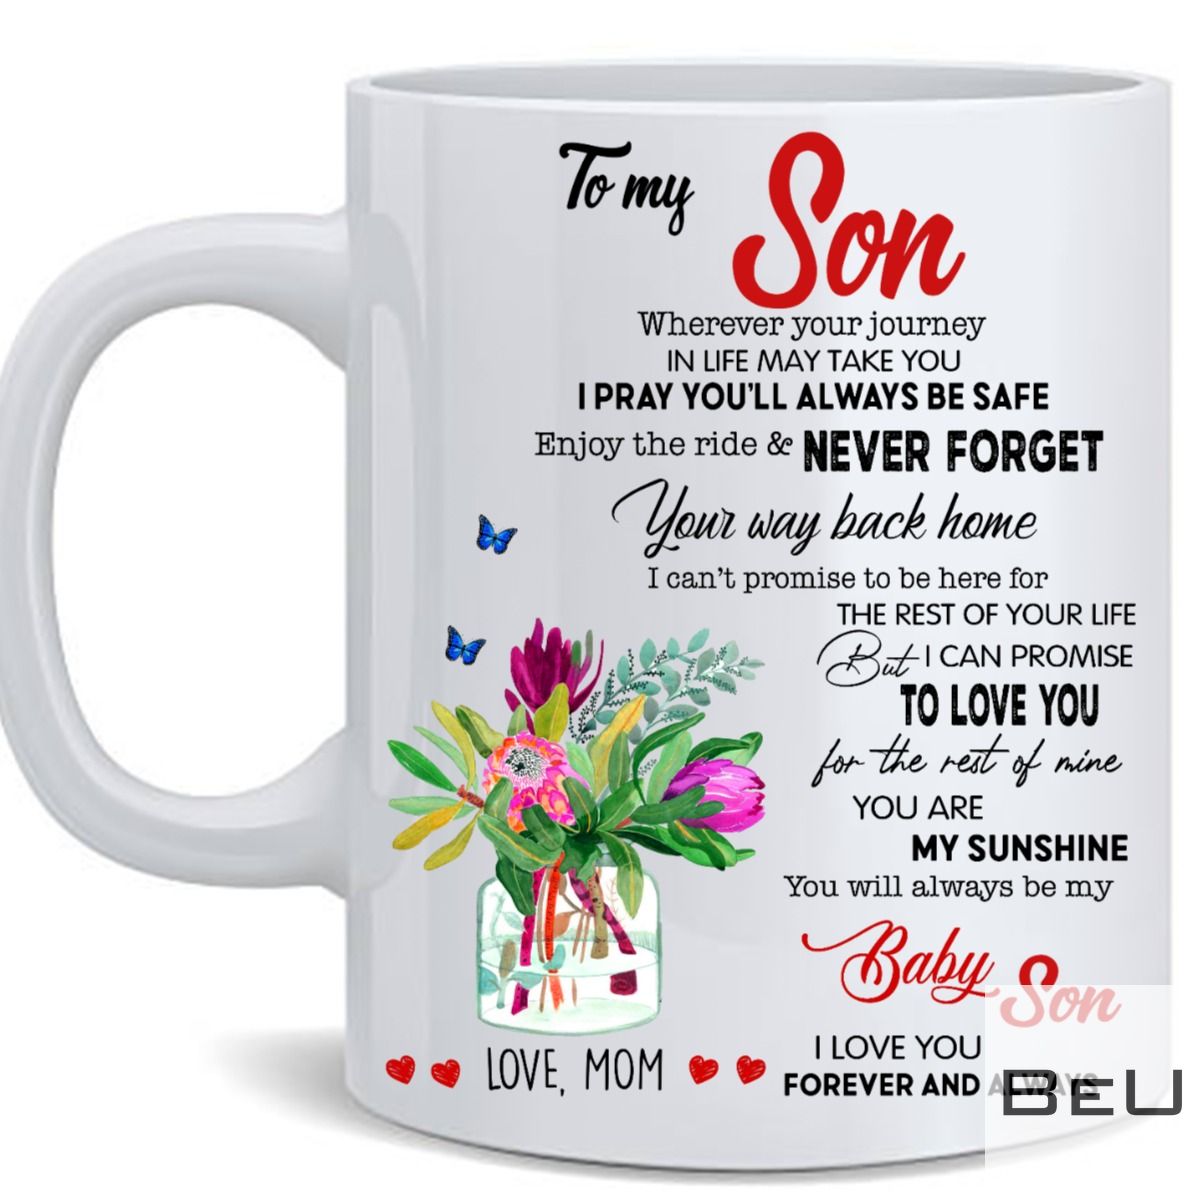 To-My-Son-Wherever-Your-Journey-In-Life-May-Take-You-I-Pray-Youll-Always-Be-Safe-Mug